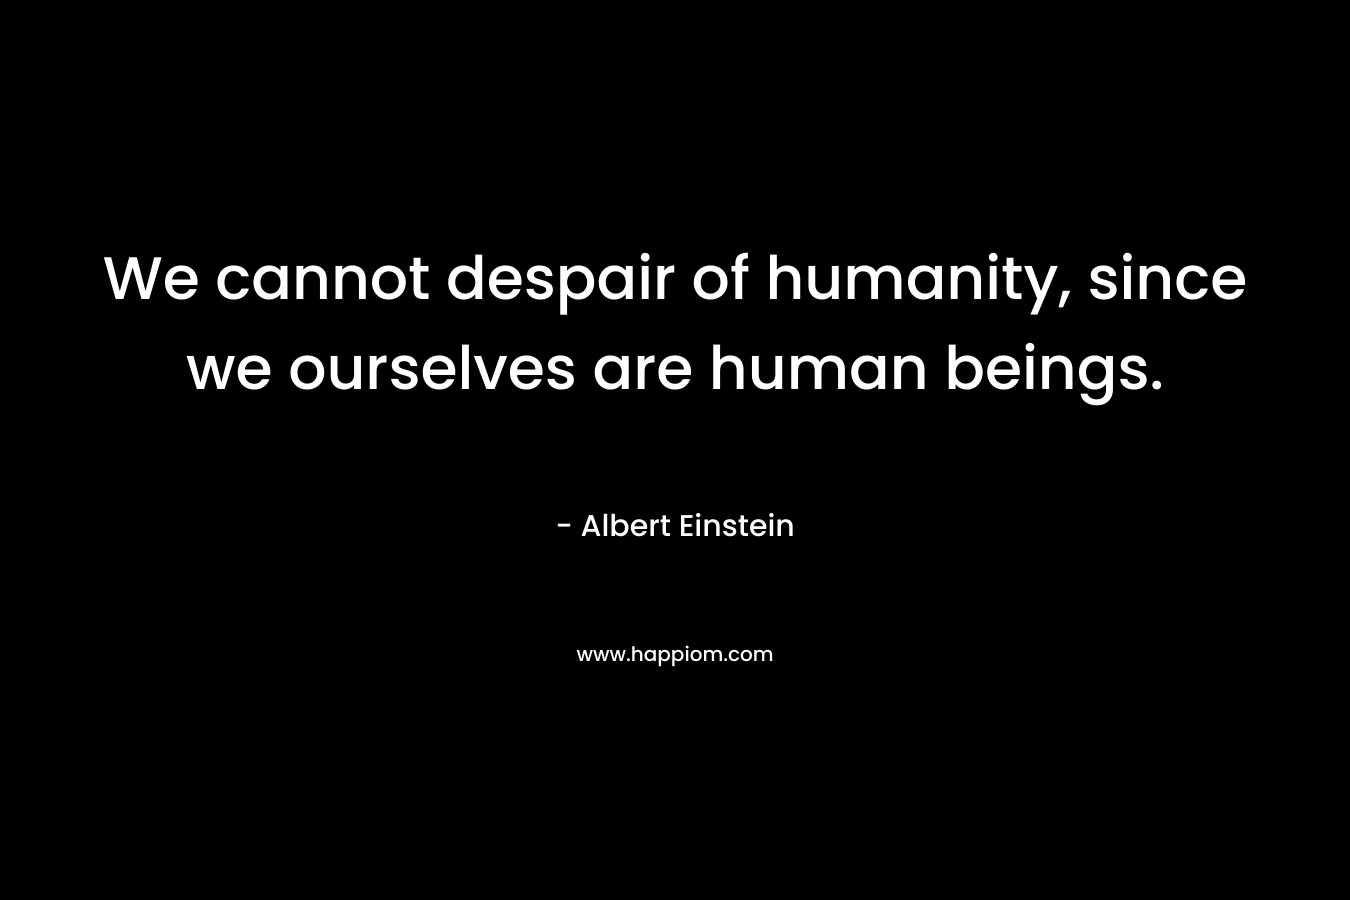 We cannot despair of humanity, since we ourselves are human beings. – Albert Einstein